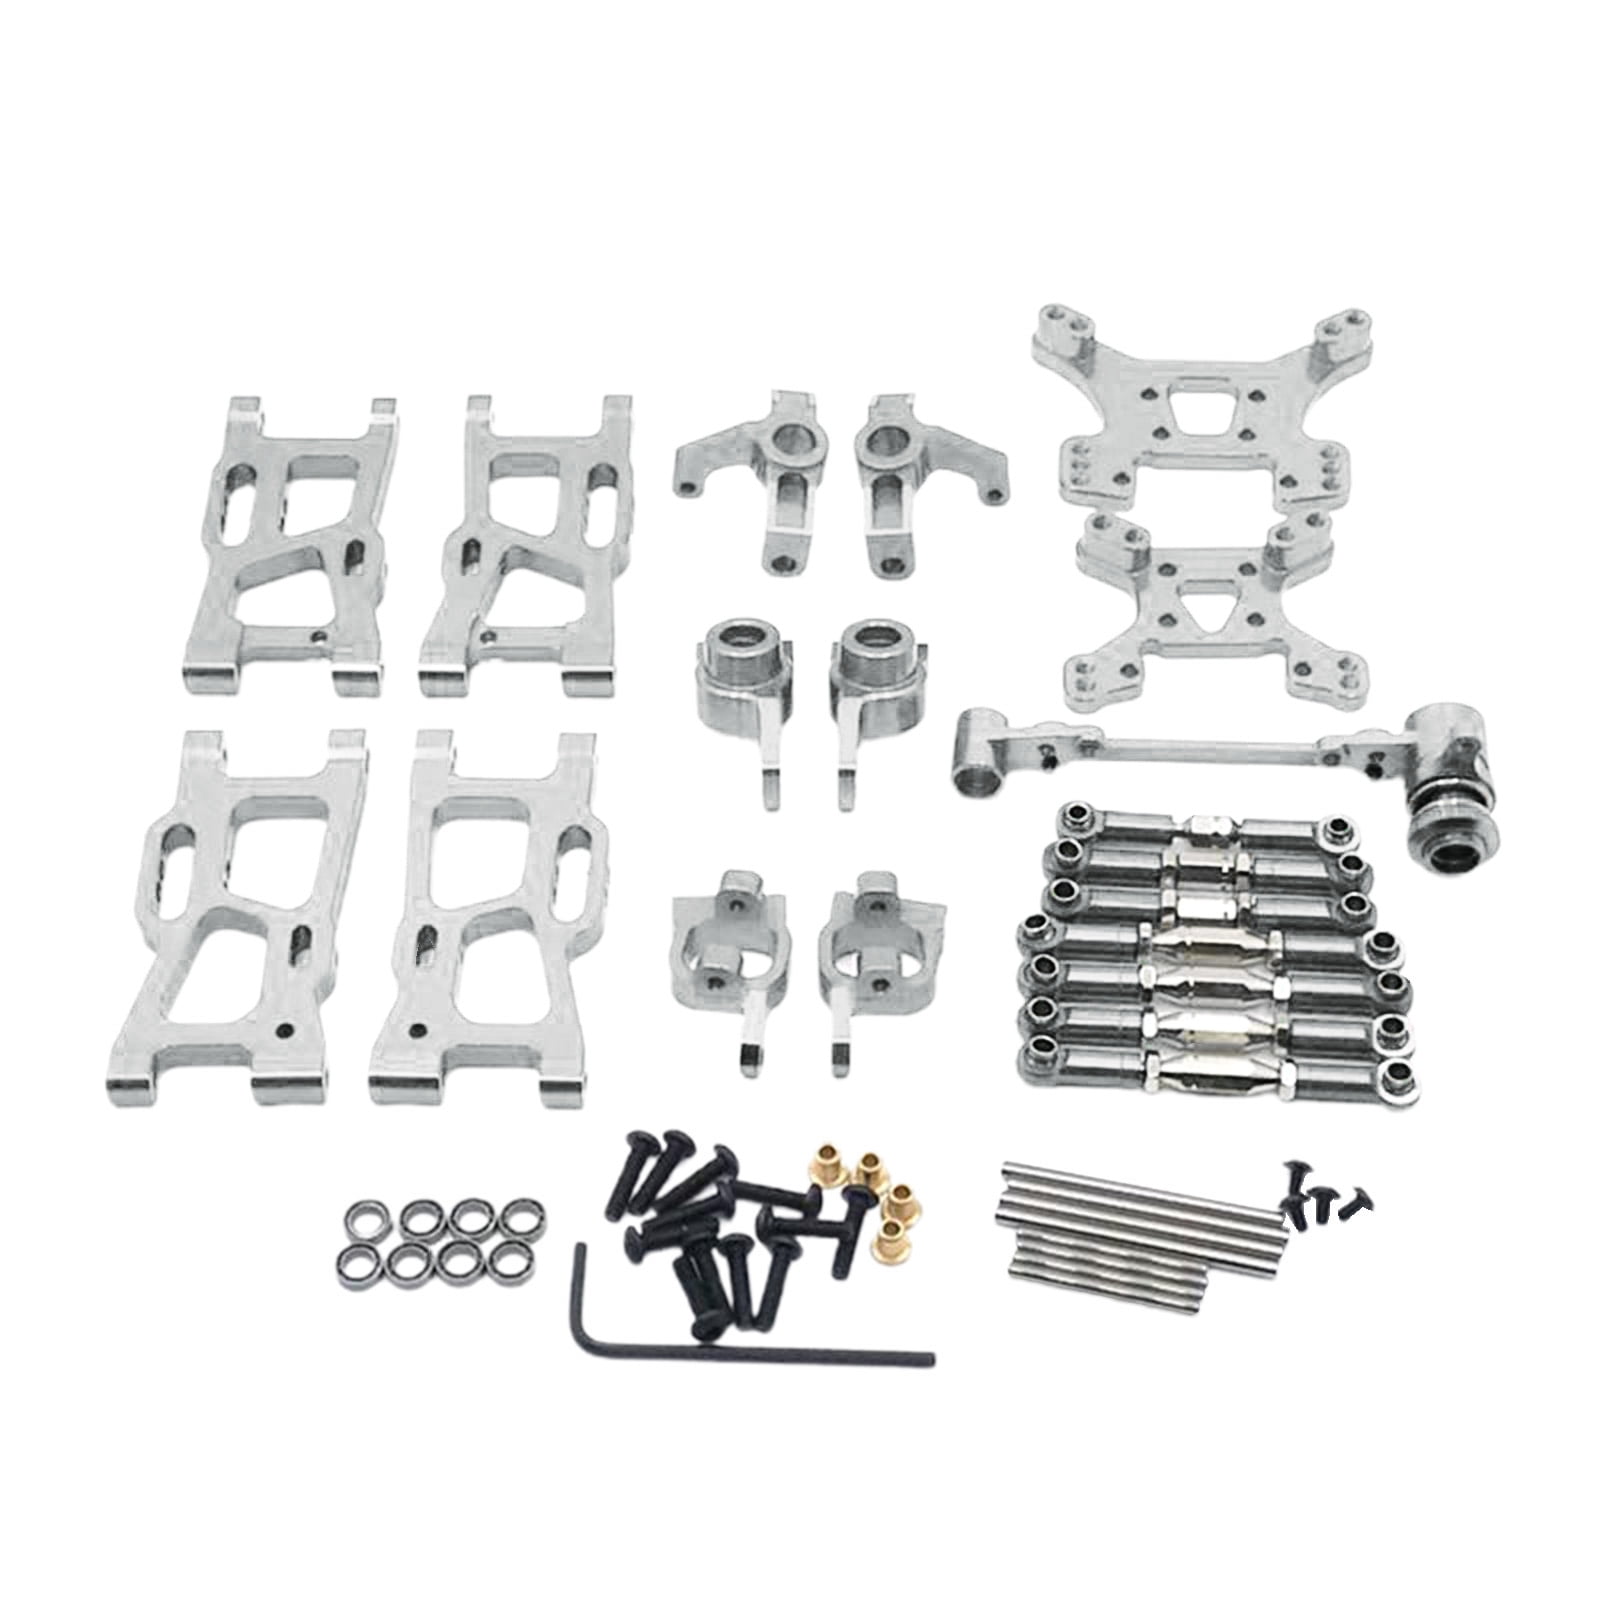 Upgrade Kits for WLtoys 1/12 124019 RC Car Truck Bearing C-Seats Accessories, 